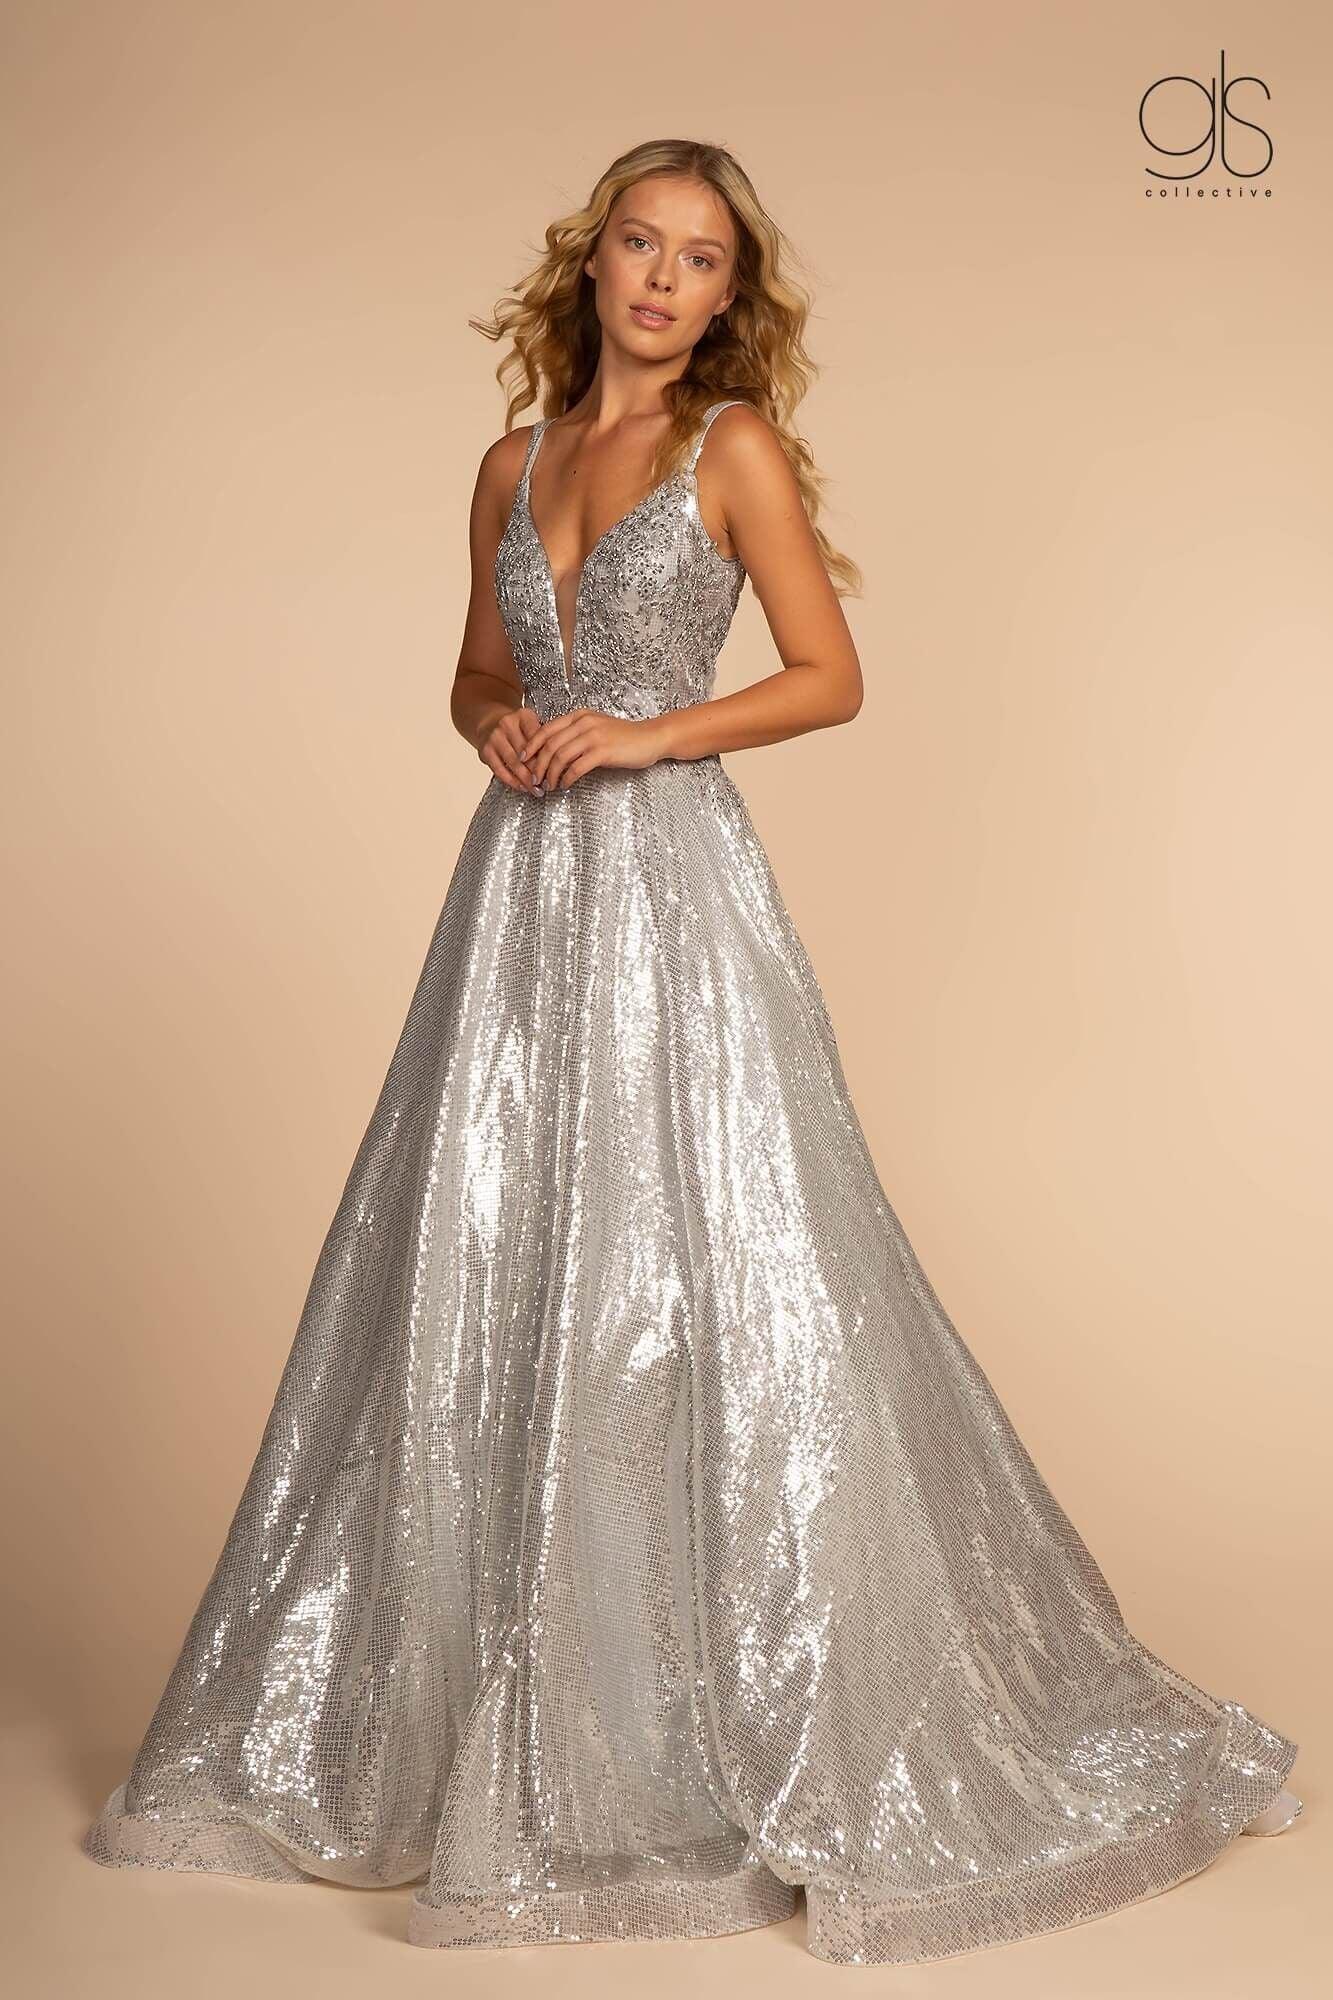 Long Prom Dress Sleeveless Sequins Ball Gown - The Dress Outlet Elizabeth K